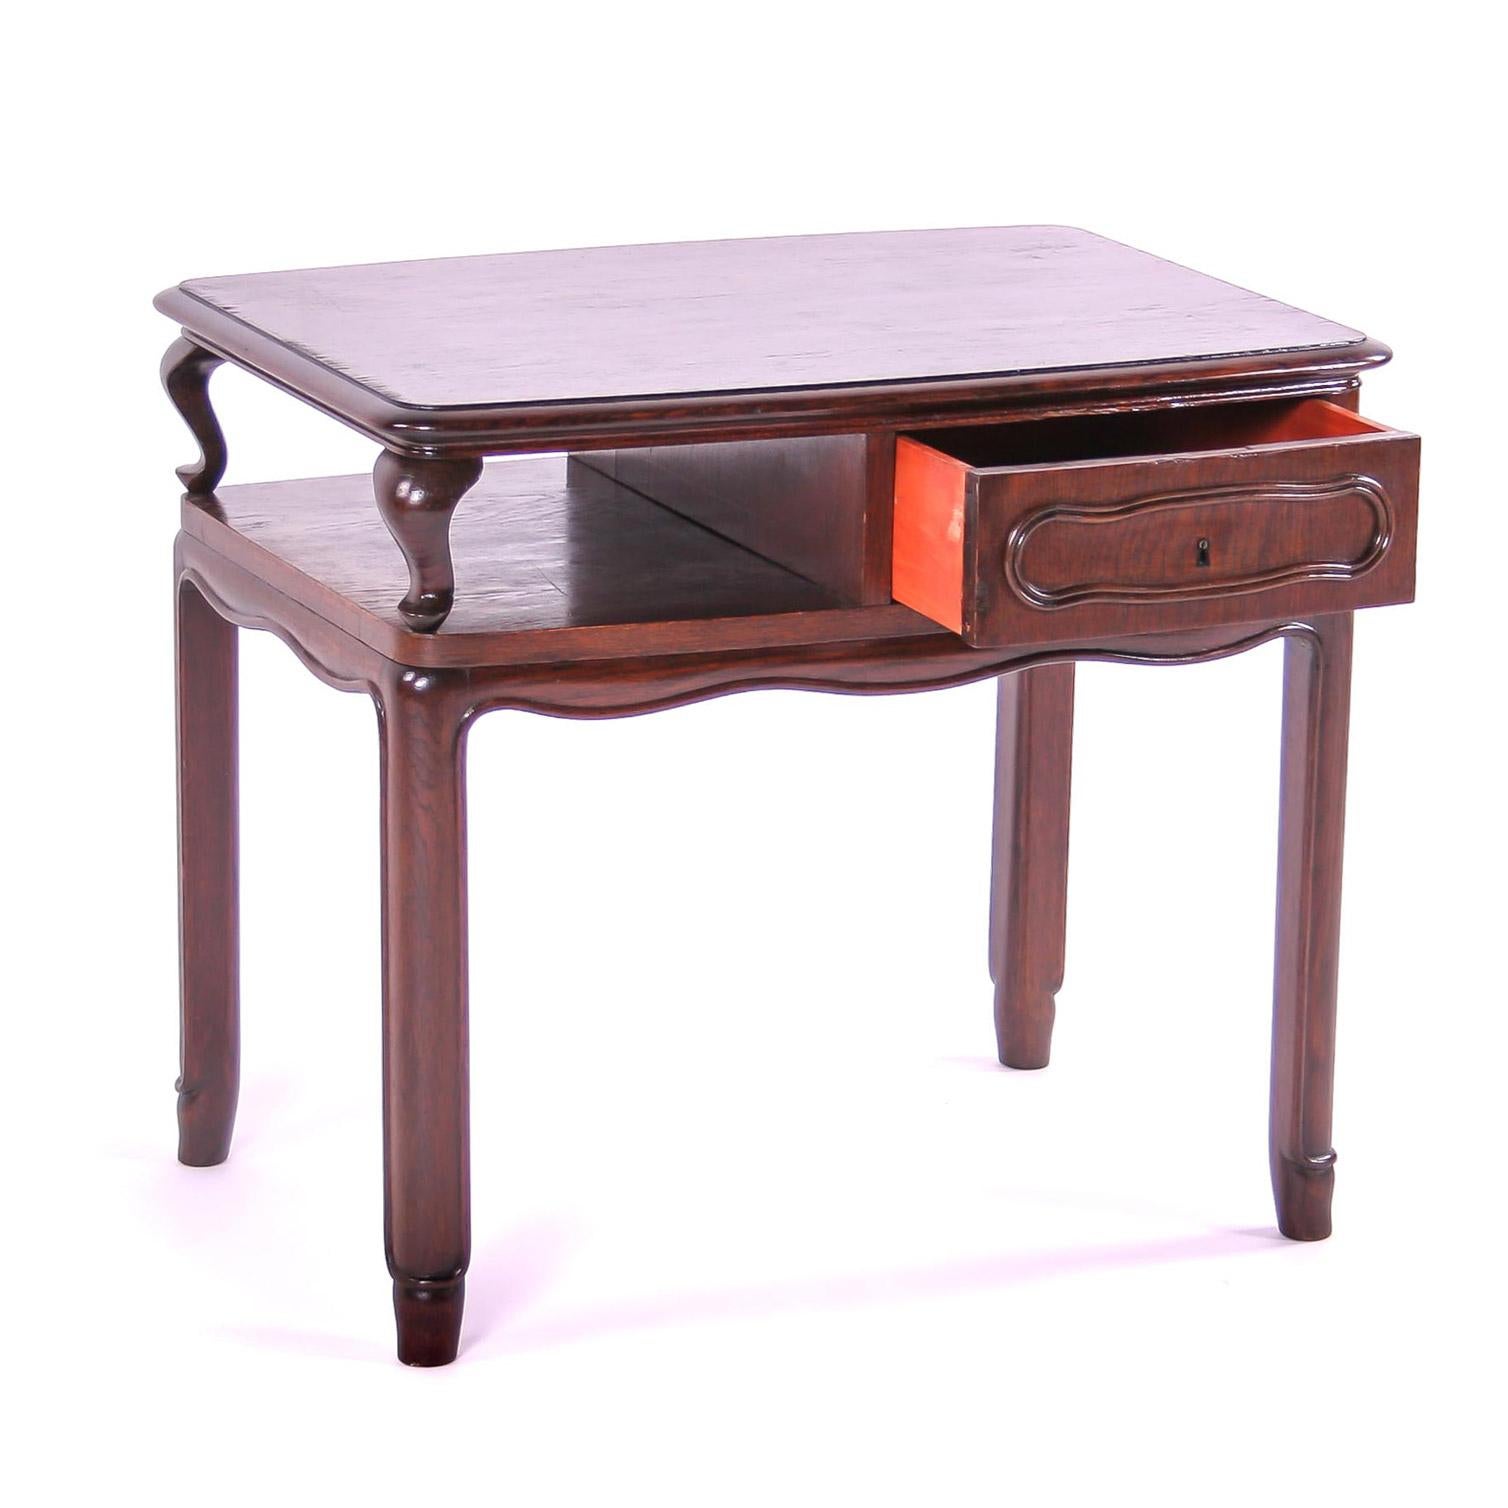 Original piece of furniture after renovation.
Mid-size table with storage and drawer. He looks at this beautiful piece of the poet. I would like to live in a period of writing papers, wood furniture, tailor-made suits. The milled edges with a light